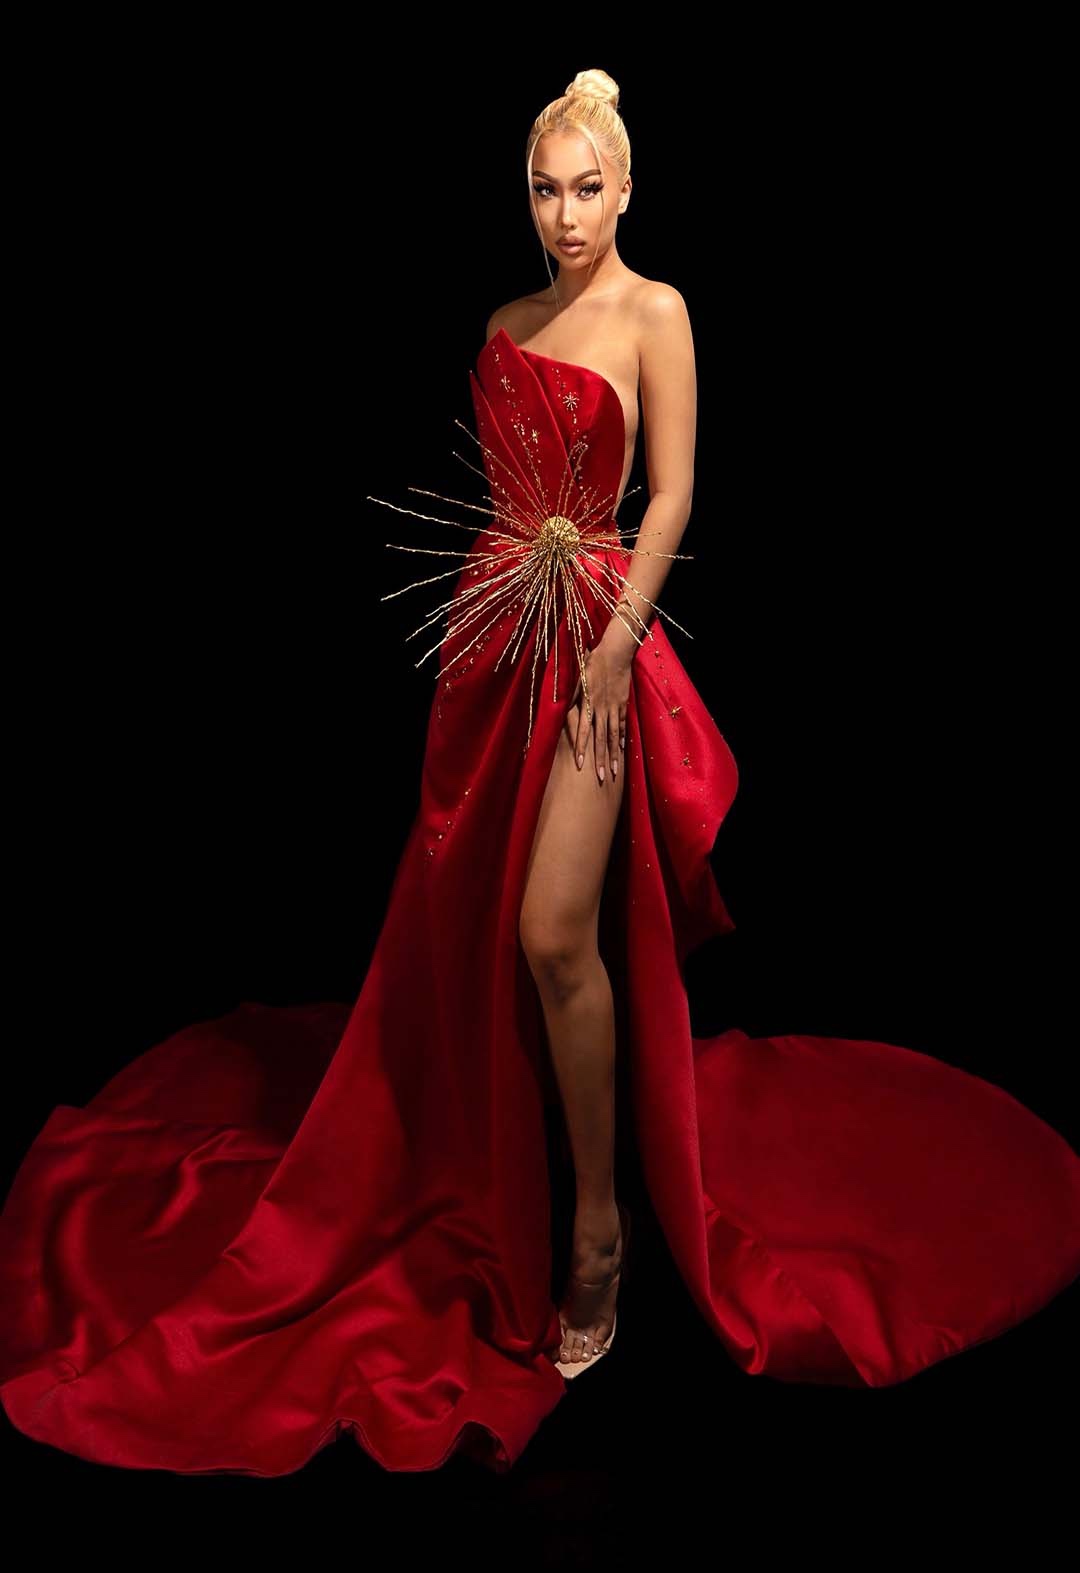 Red satin strapless gown with gold metal star attached to a ribbon belt and bursting-effect celestial bead work